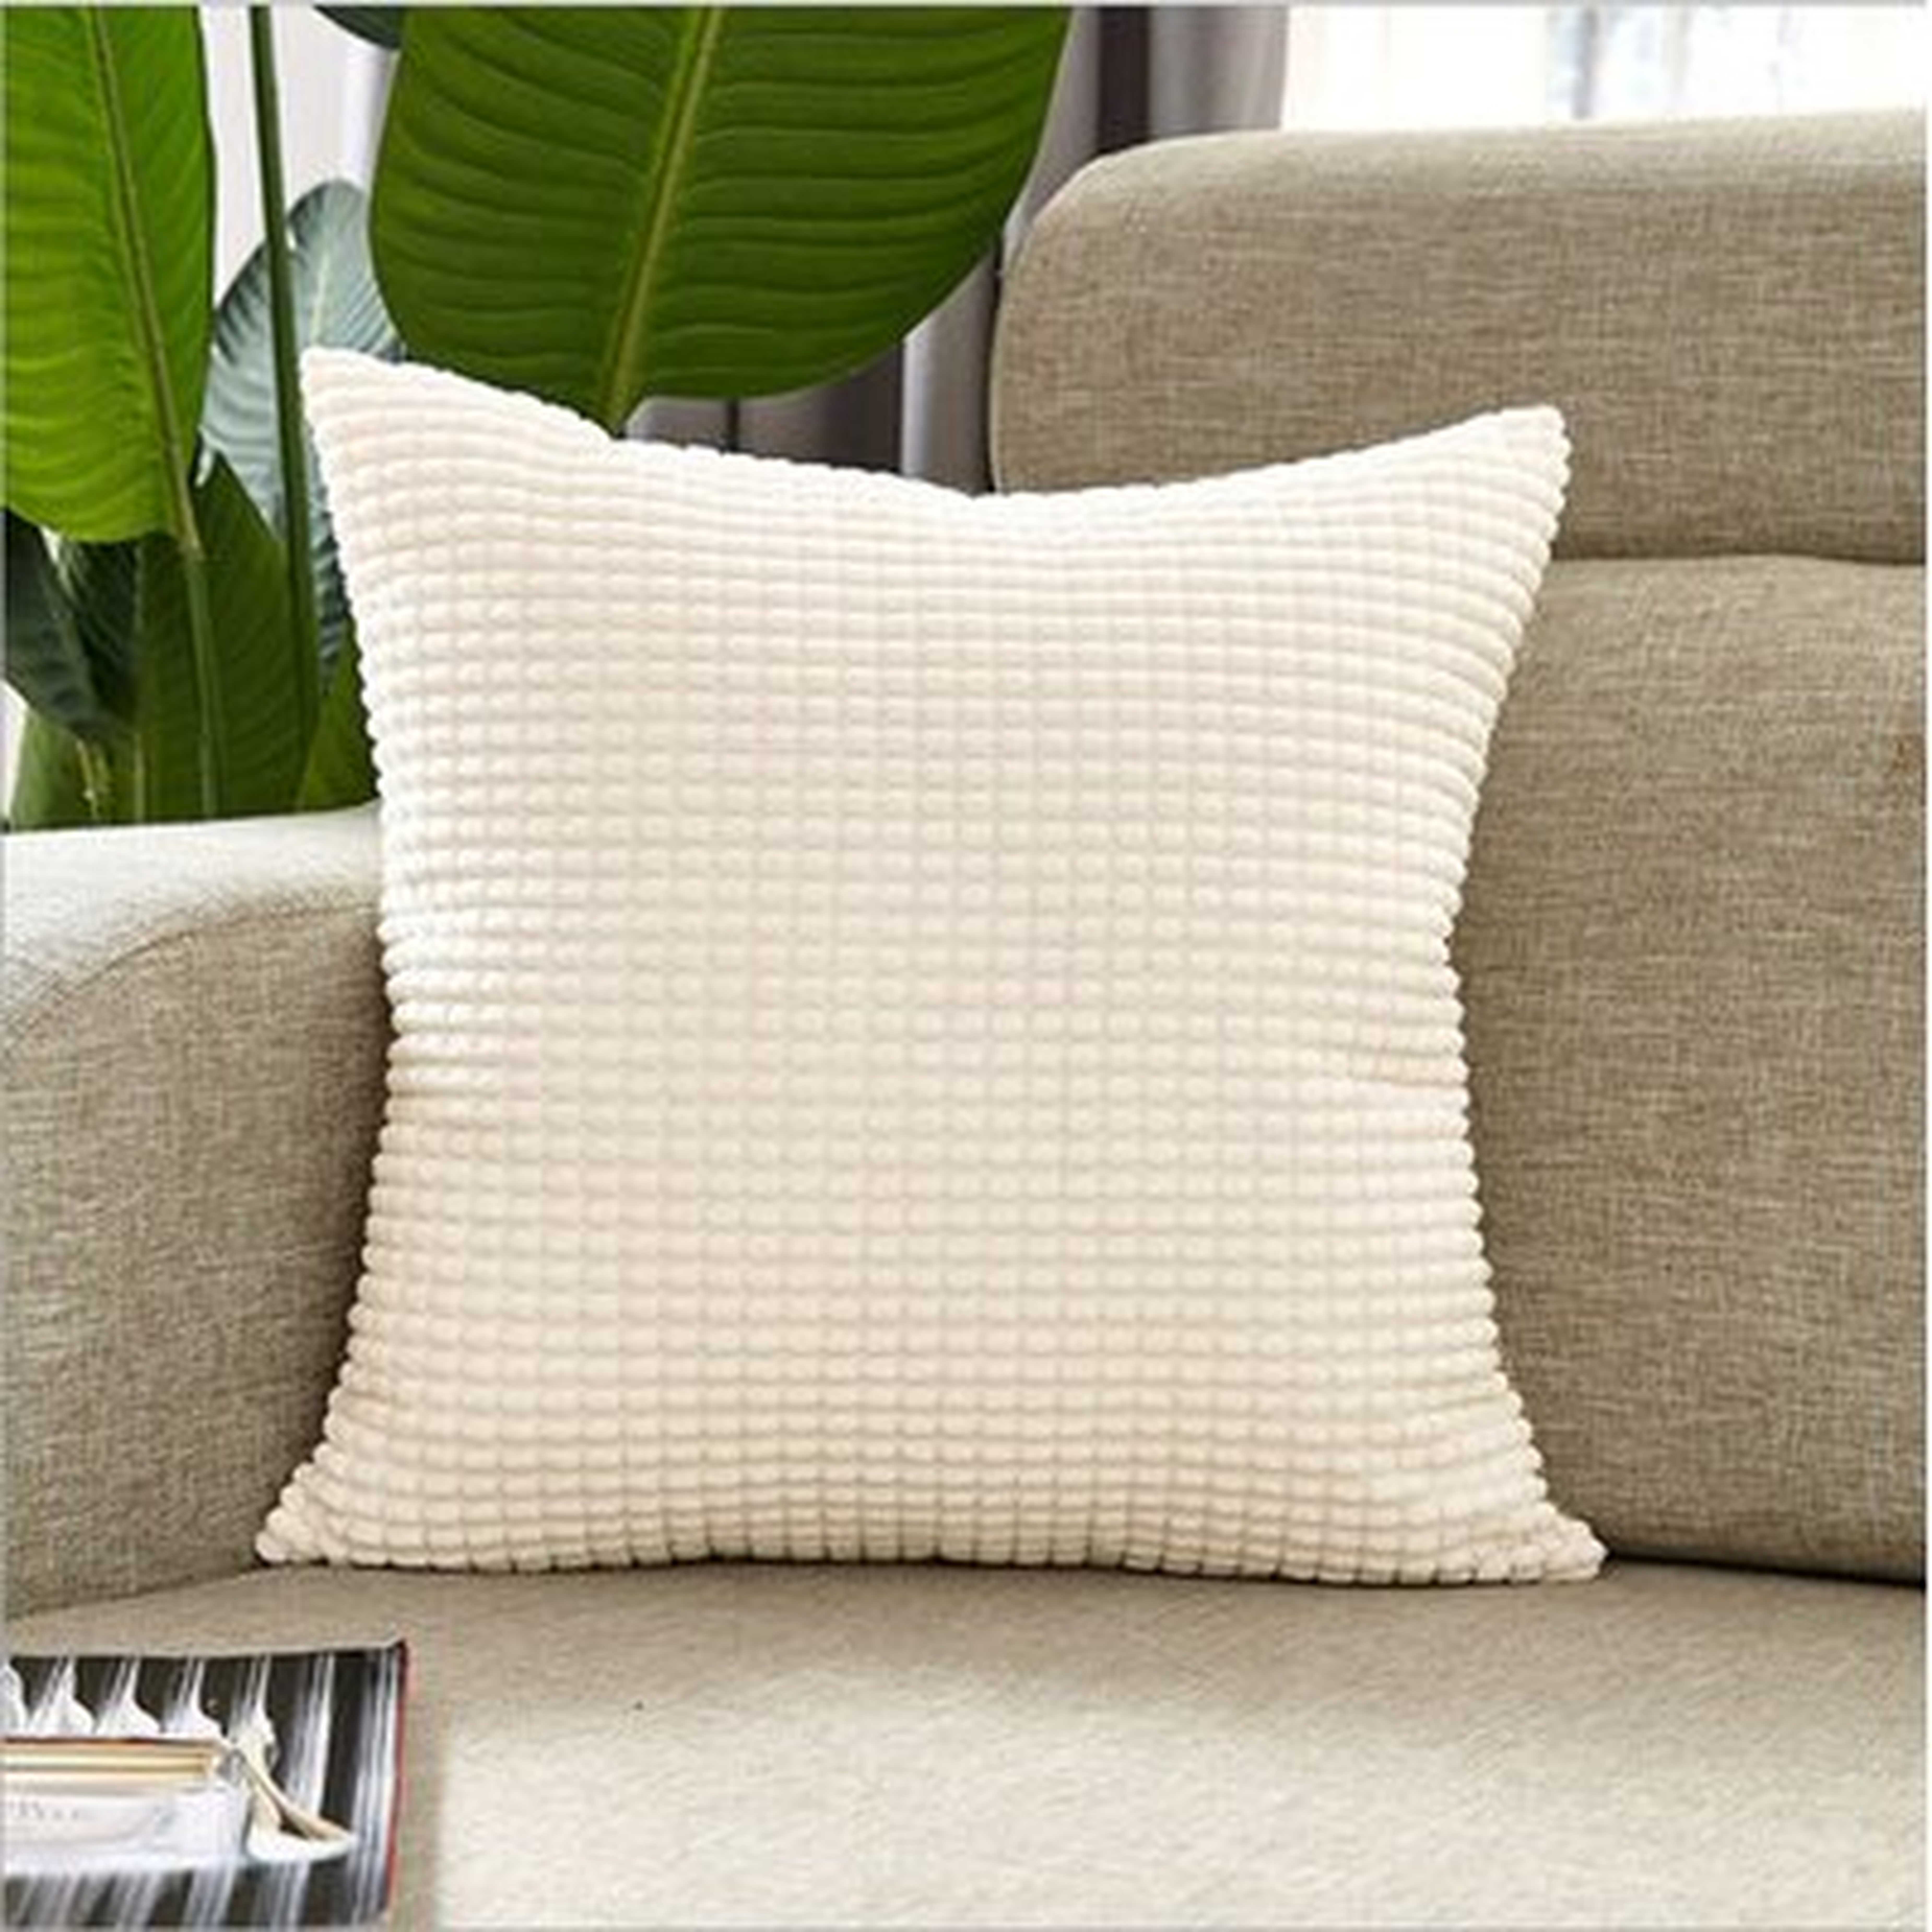 18"x18" Square Throw  Pillow With Inserts - Wayfair